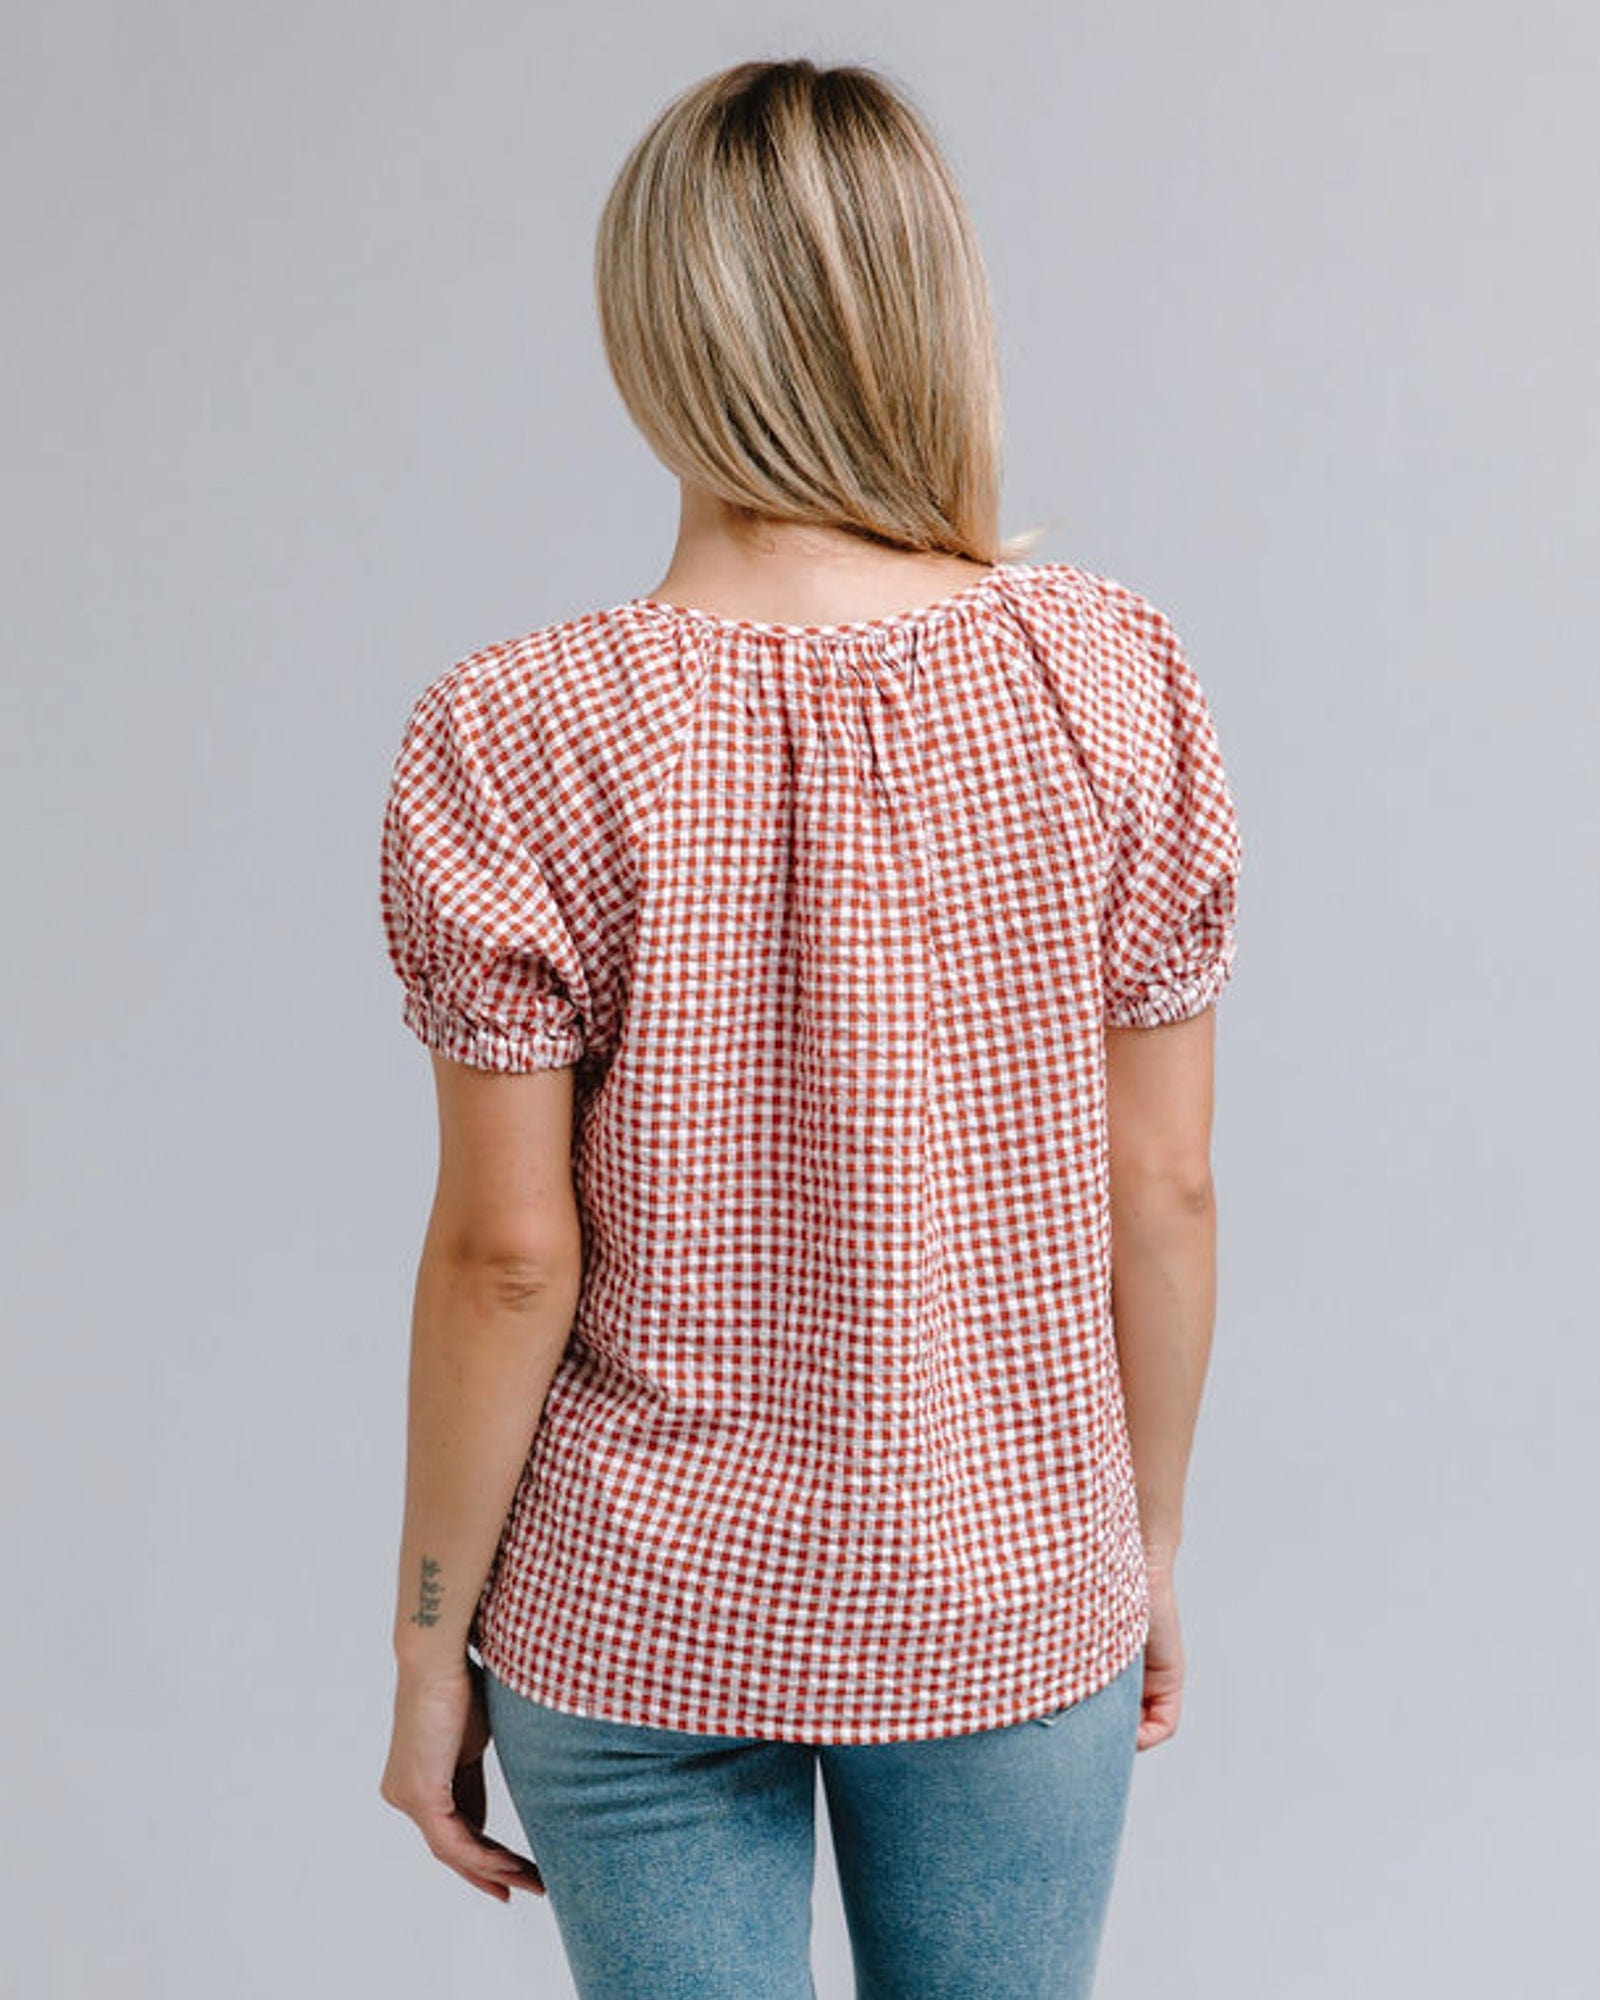 Woman in a red and white plaid, short sleeve, v-neck top with lace along neckline